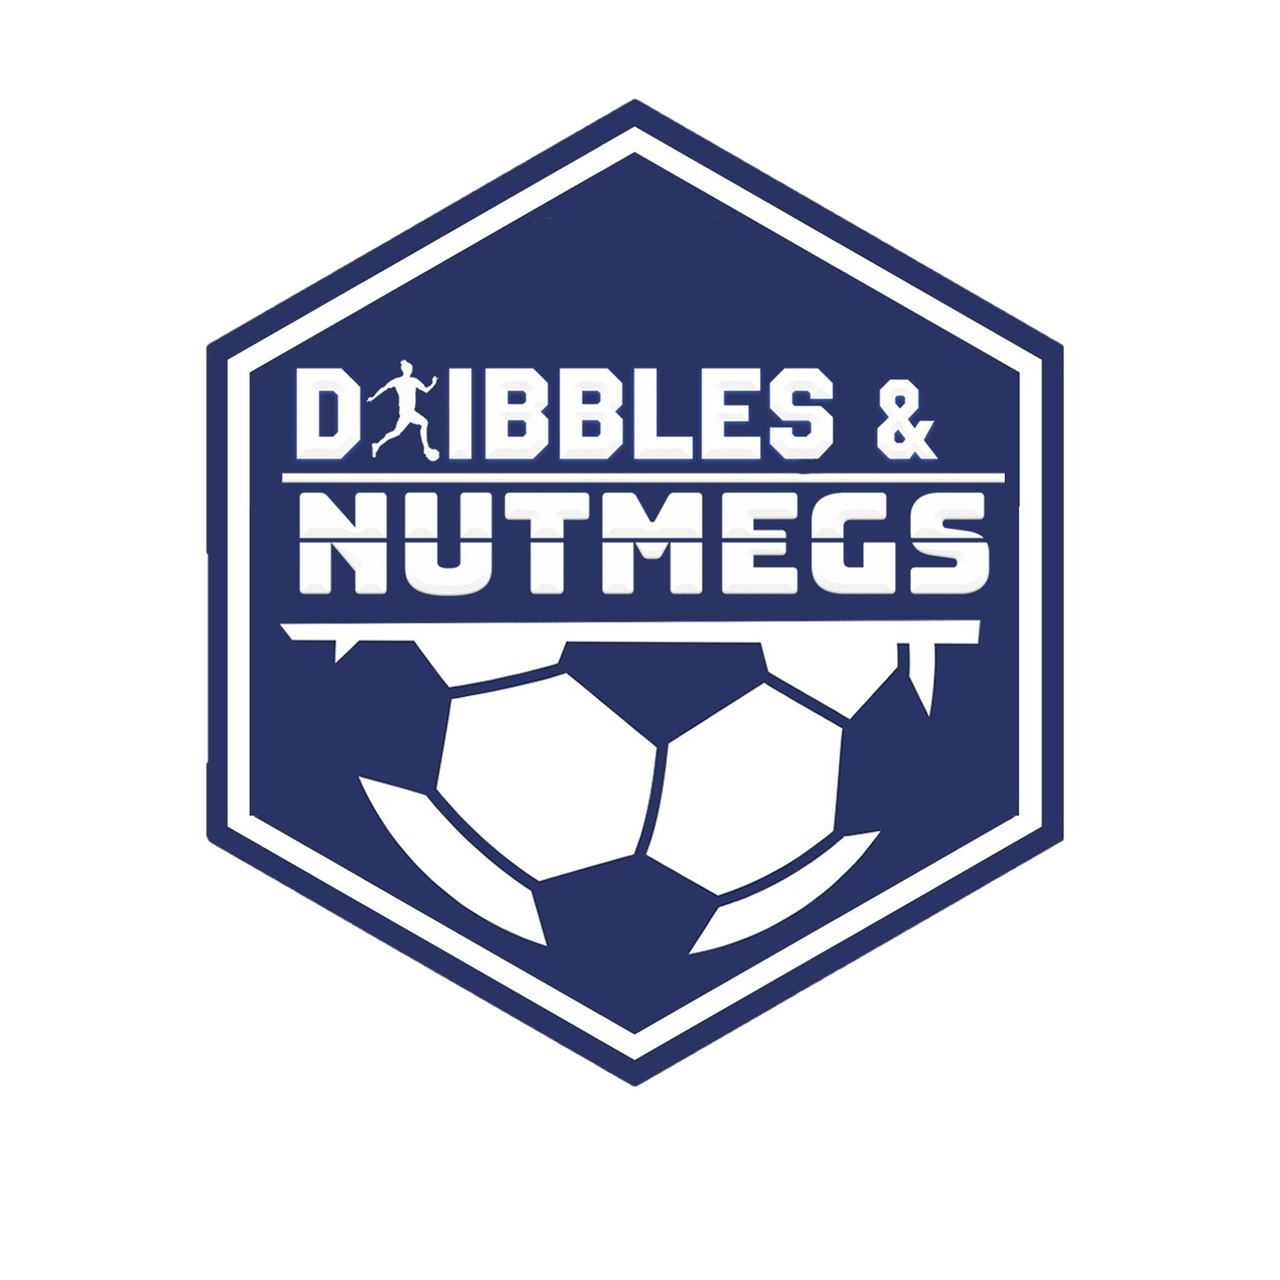 Artwork for Dribbles and Nutmegs